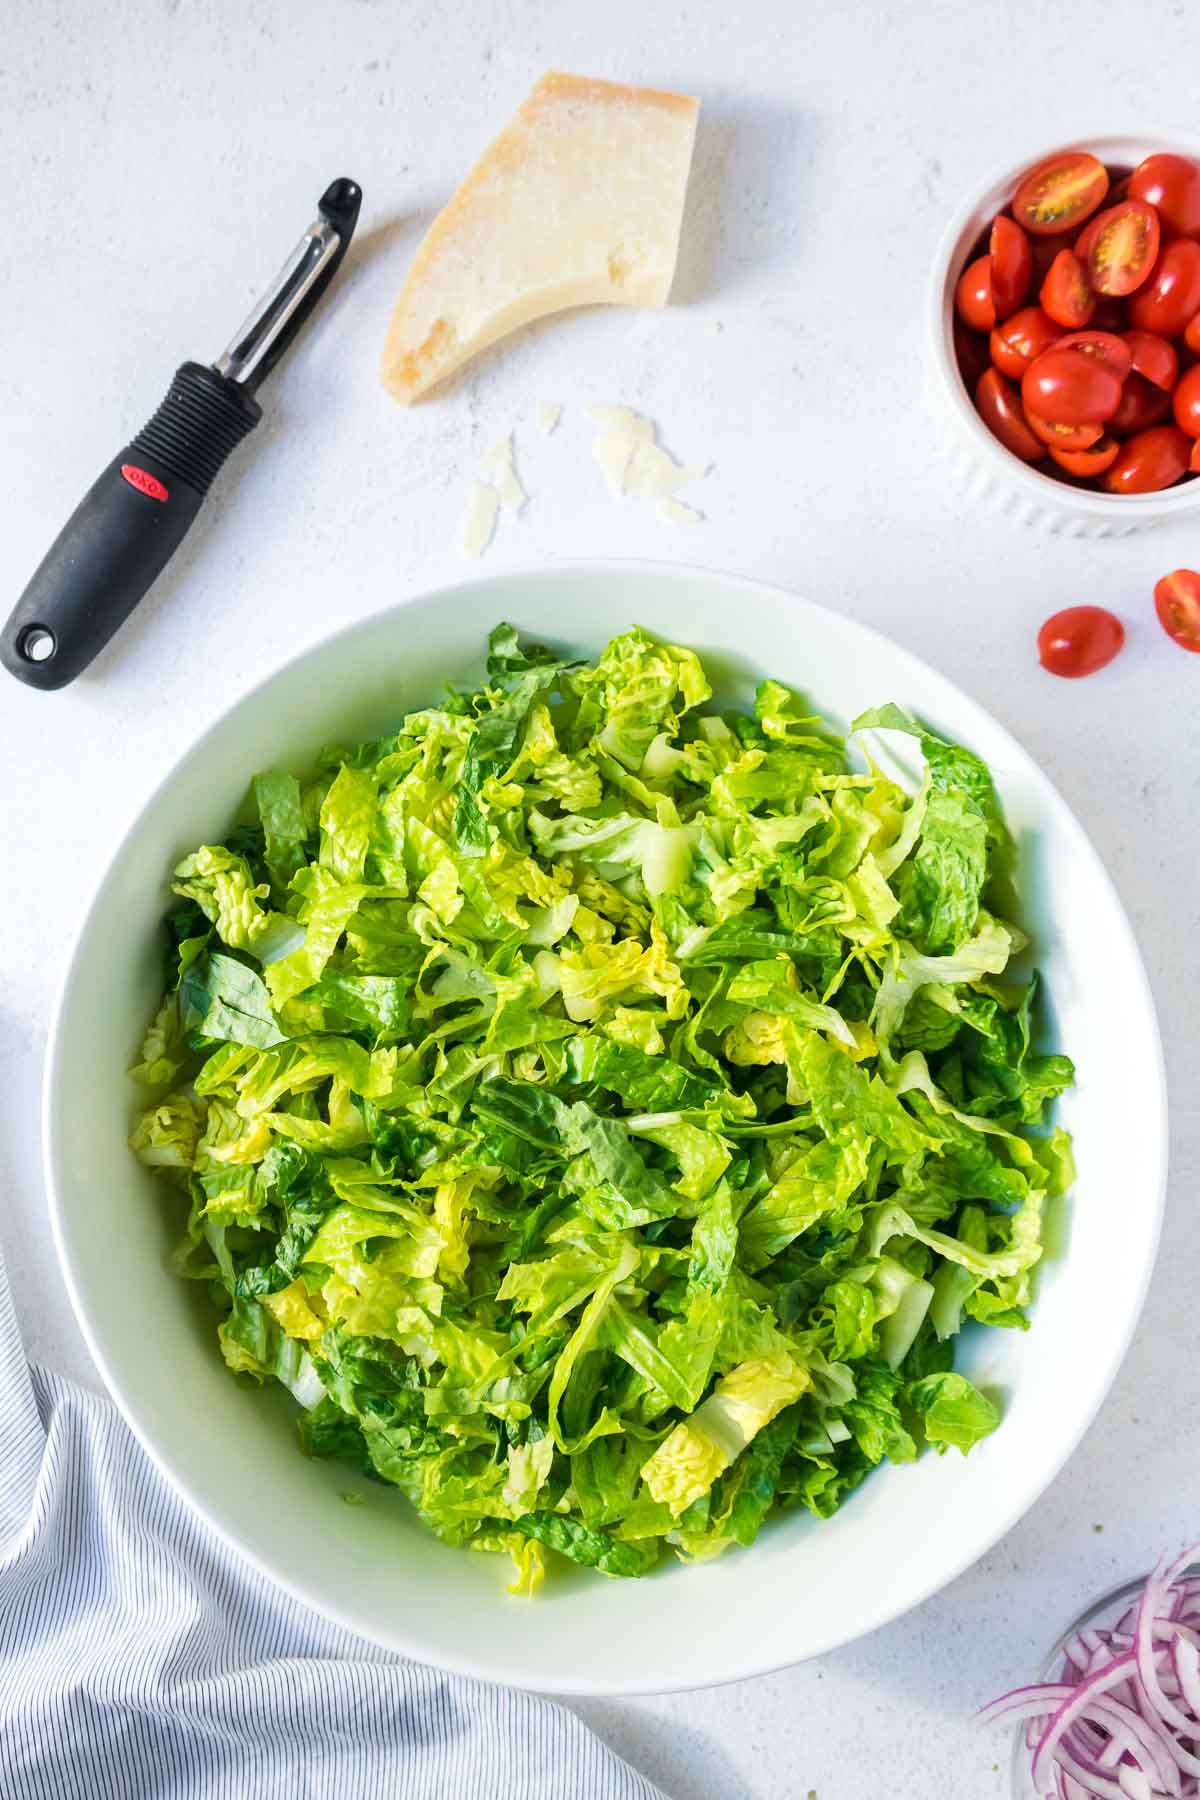 Romaine lettuce in a large white salad bowl.